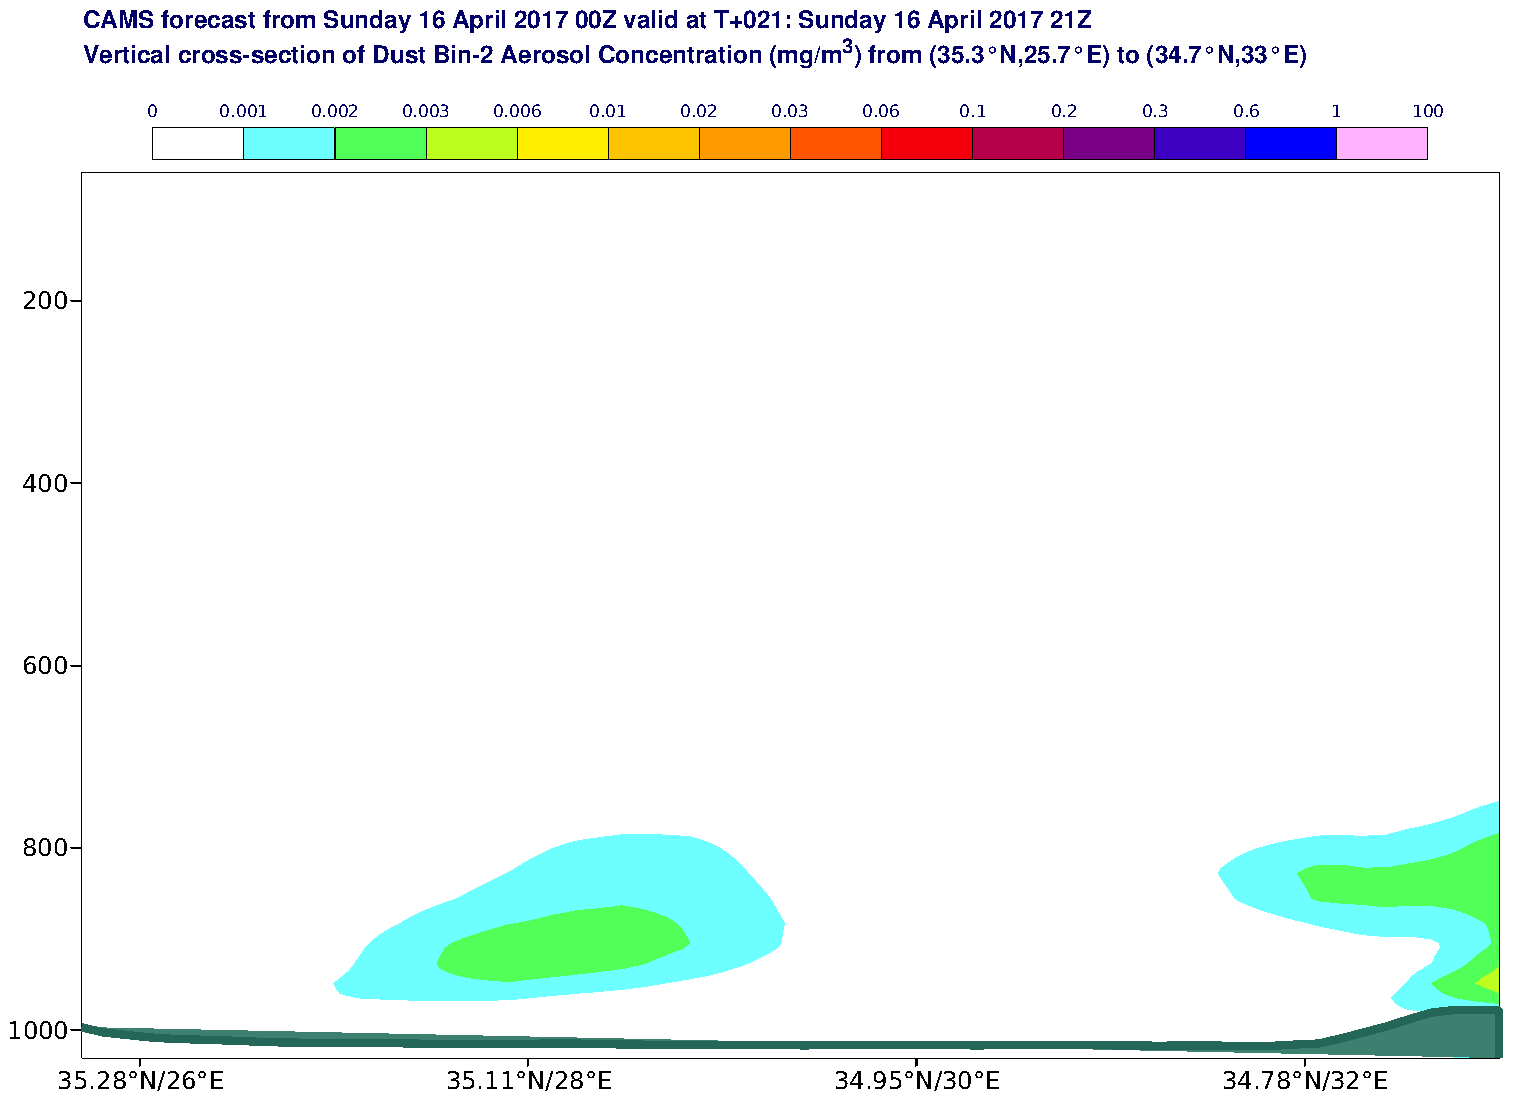 Vertical cross-section of Dust Bin-2 Aerosol Concentration (mg/m3) valid at T21 - 2017-04-16 21:00